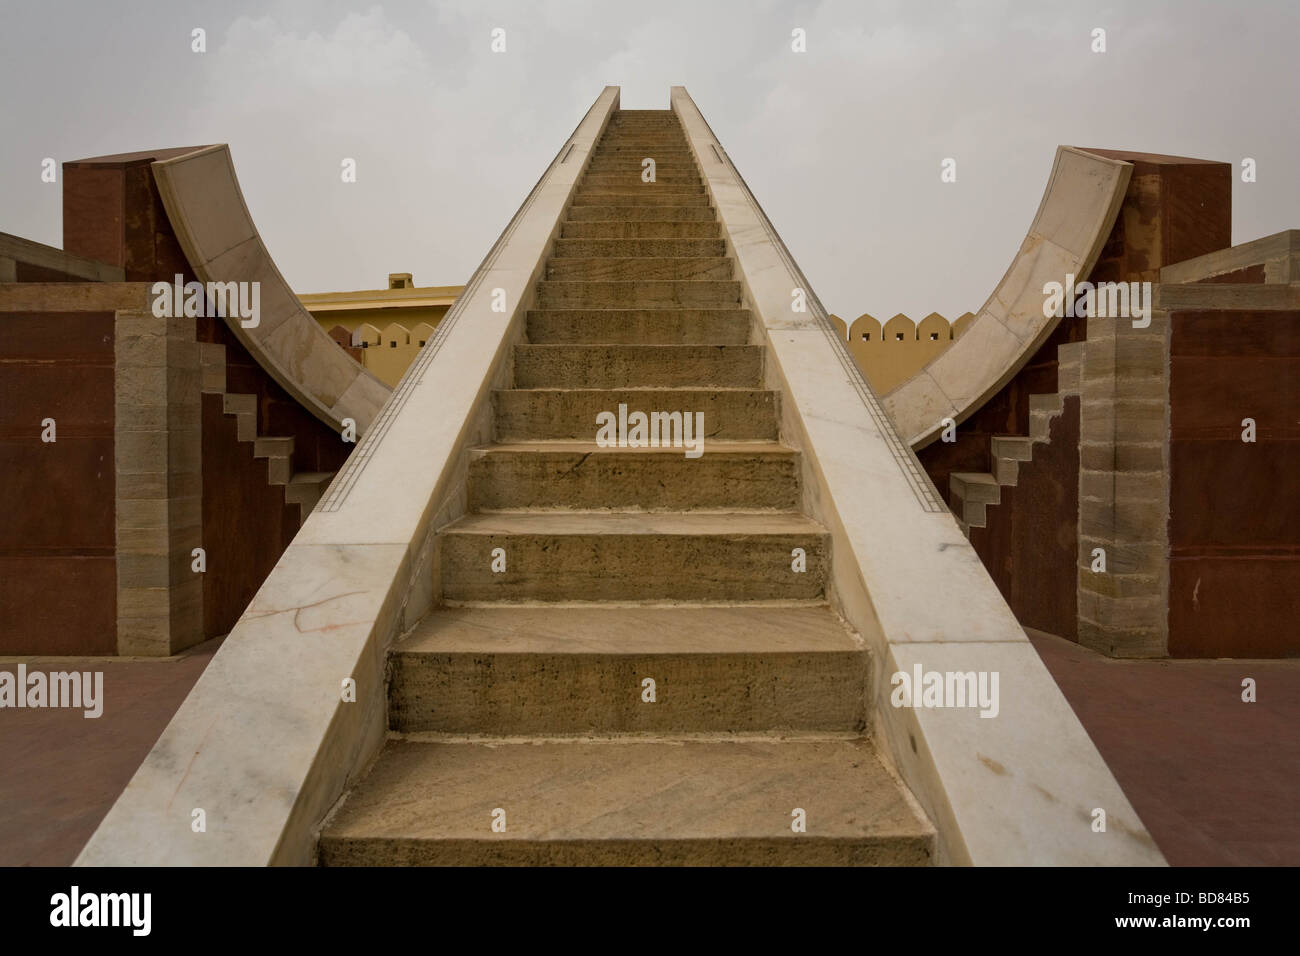 Strange instruments as large as buildings in the Jantar Mantar observatory in Jaipur Stock Photo